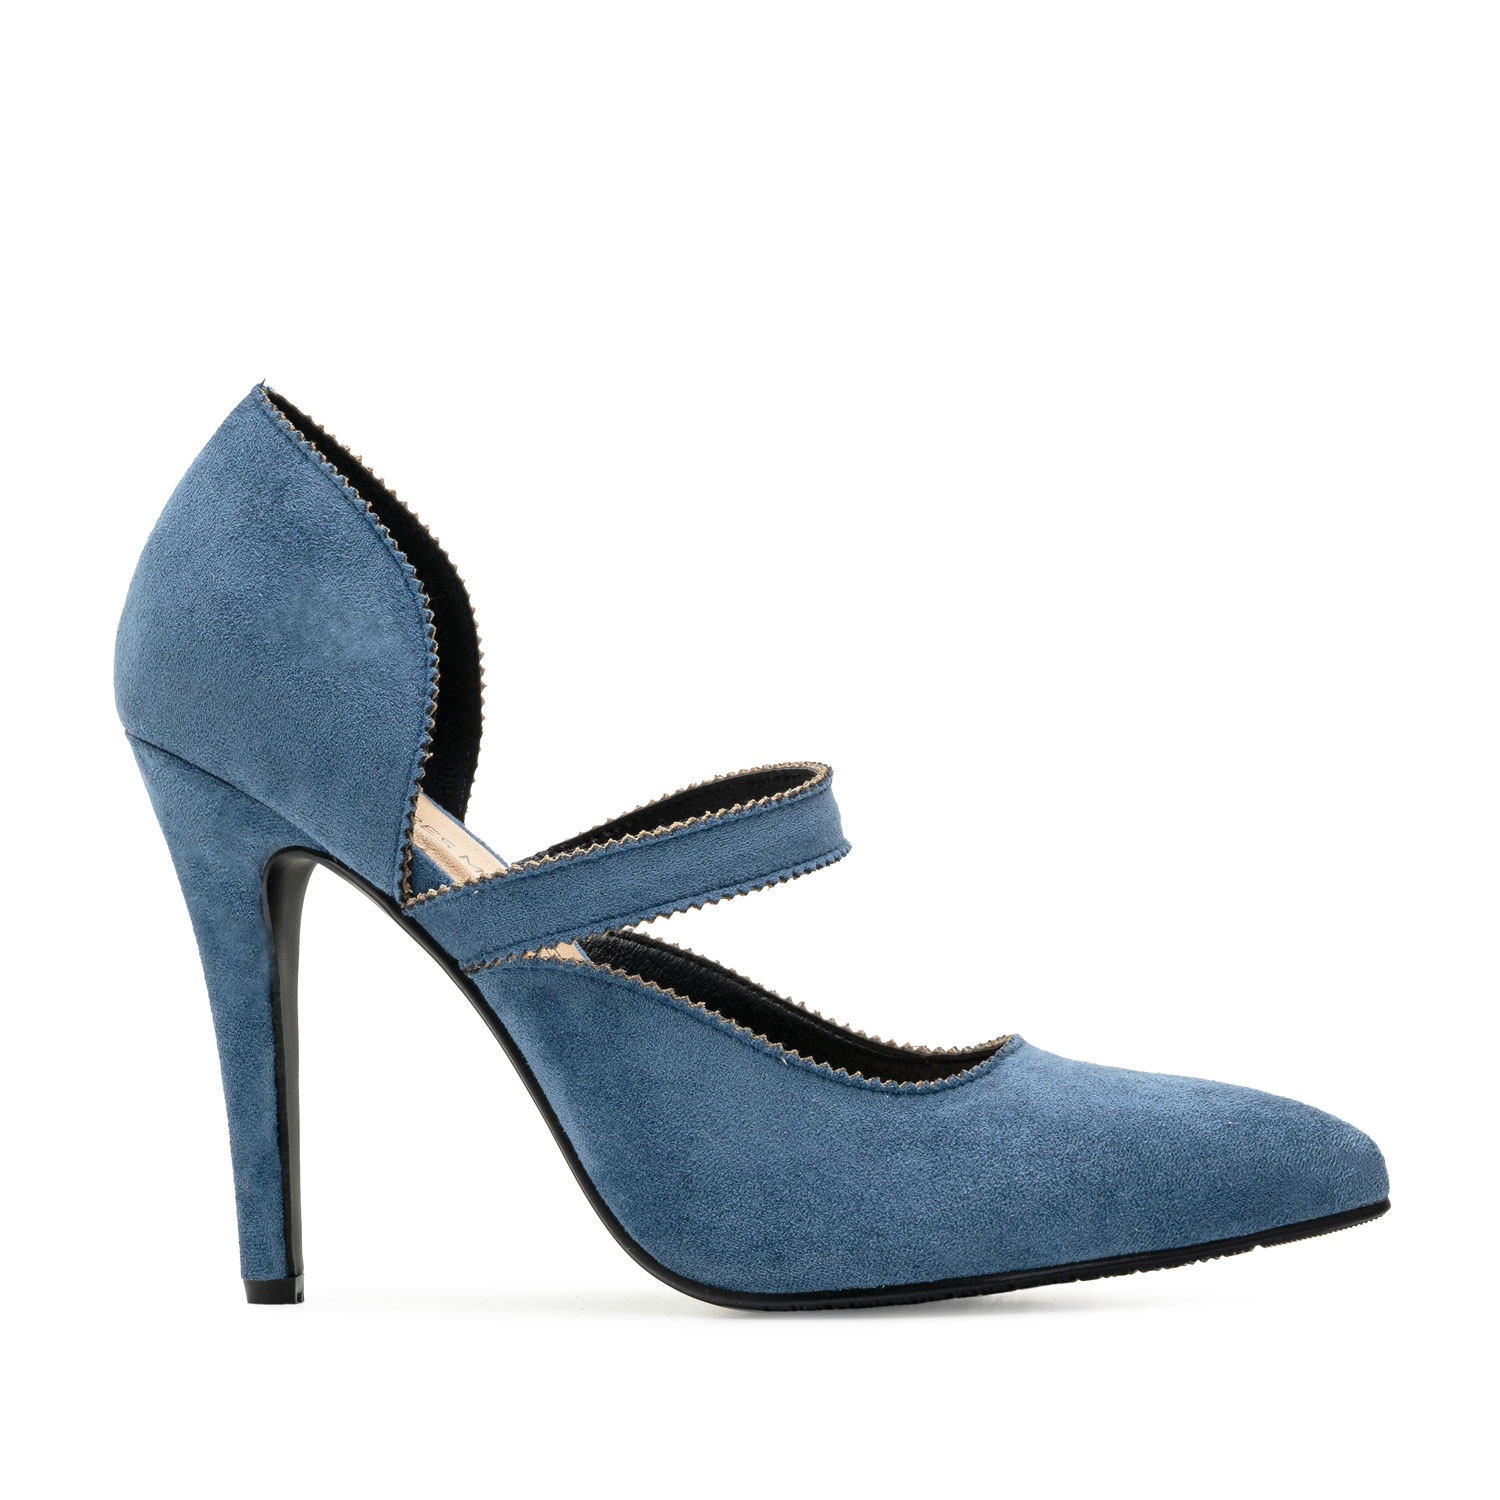 Blue Faux Suedette Mary Jane High Heels 